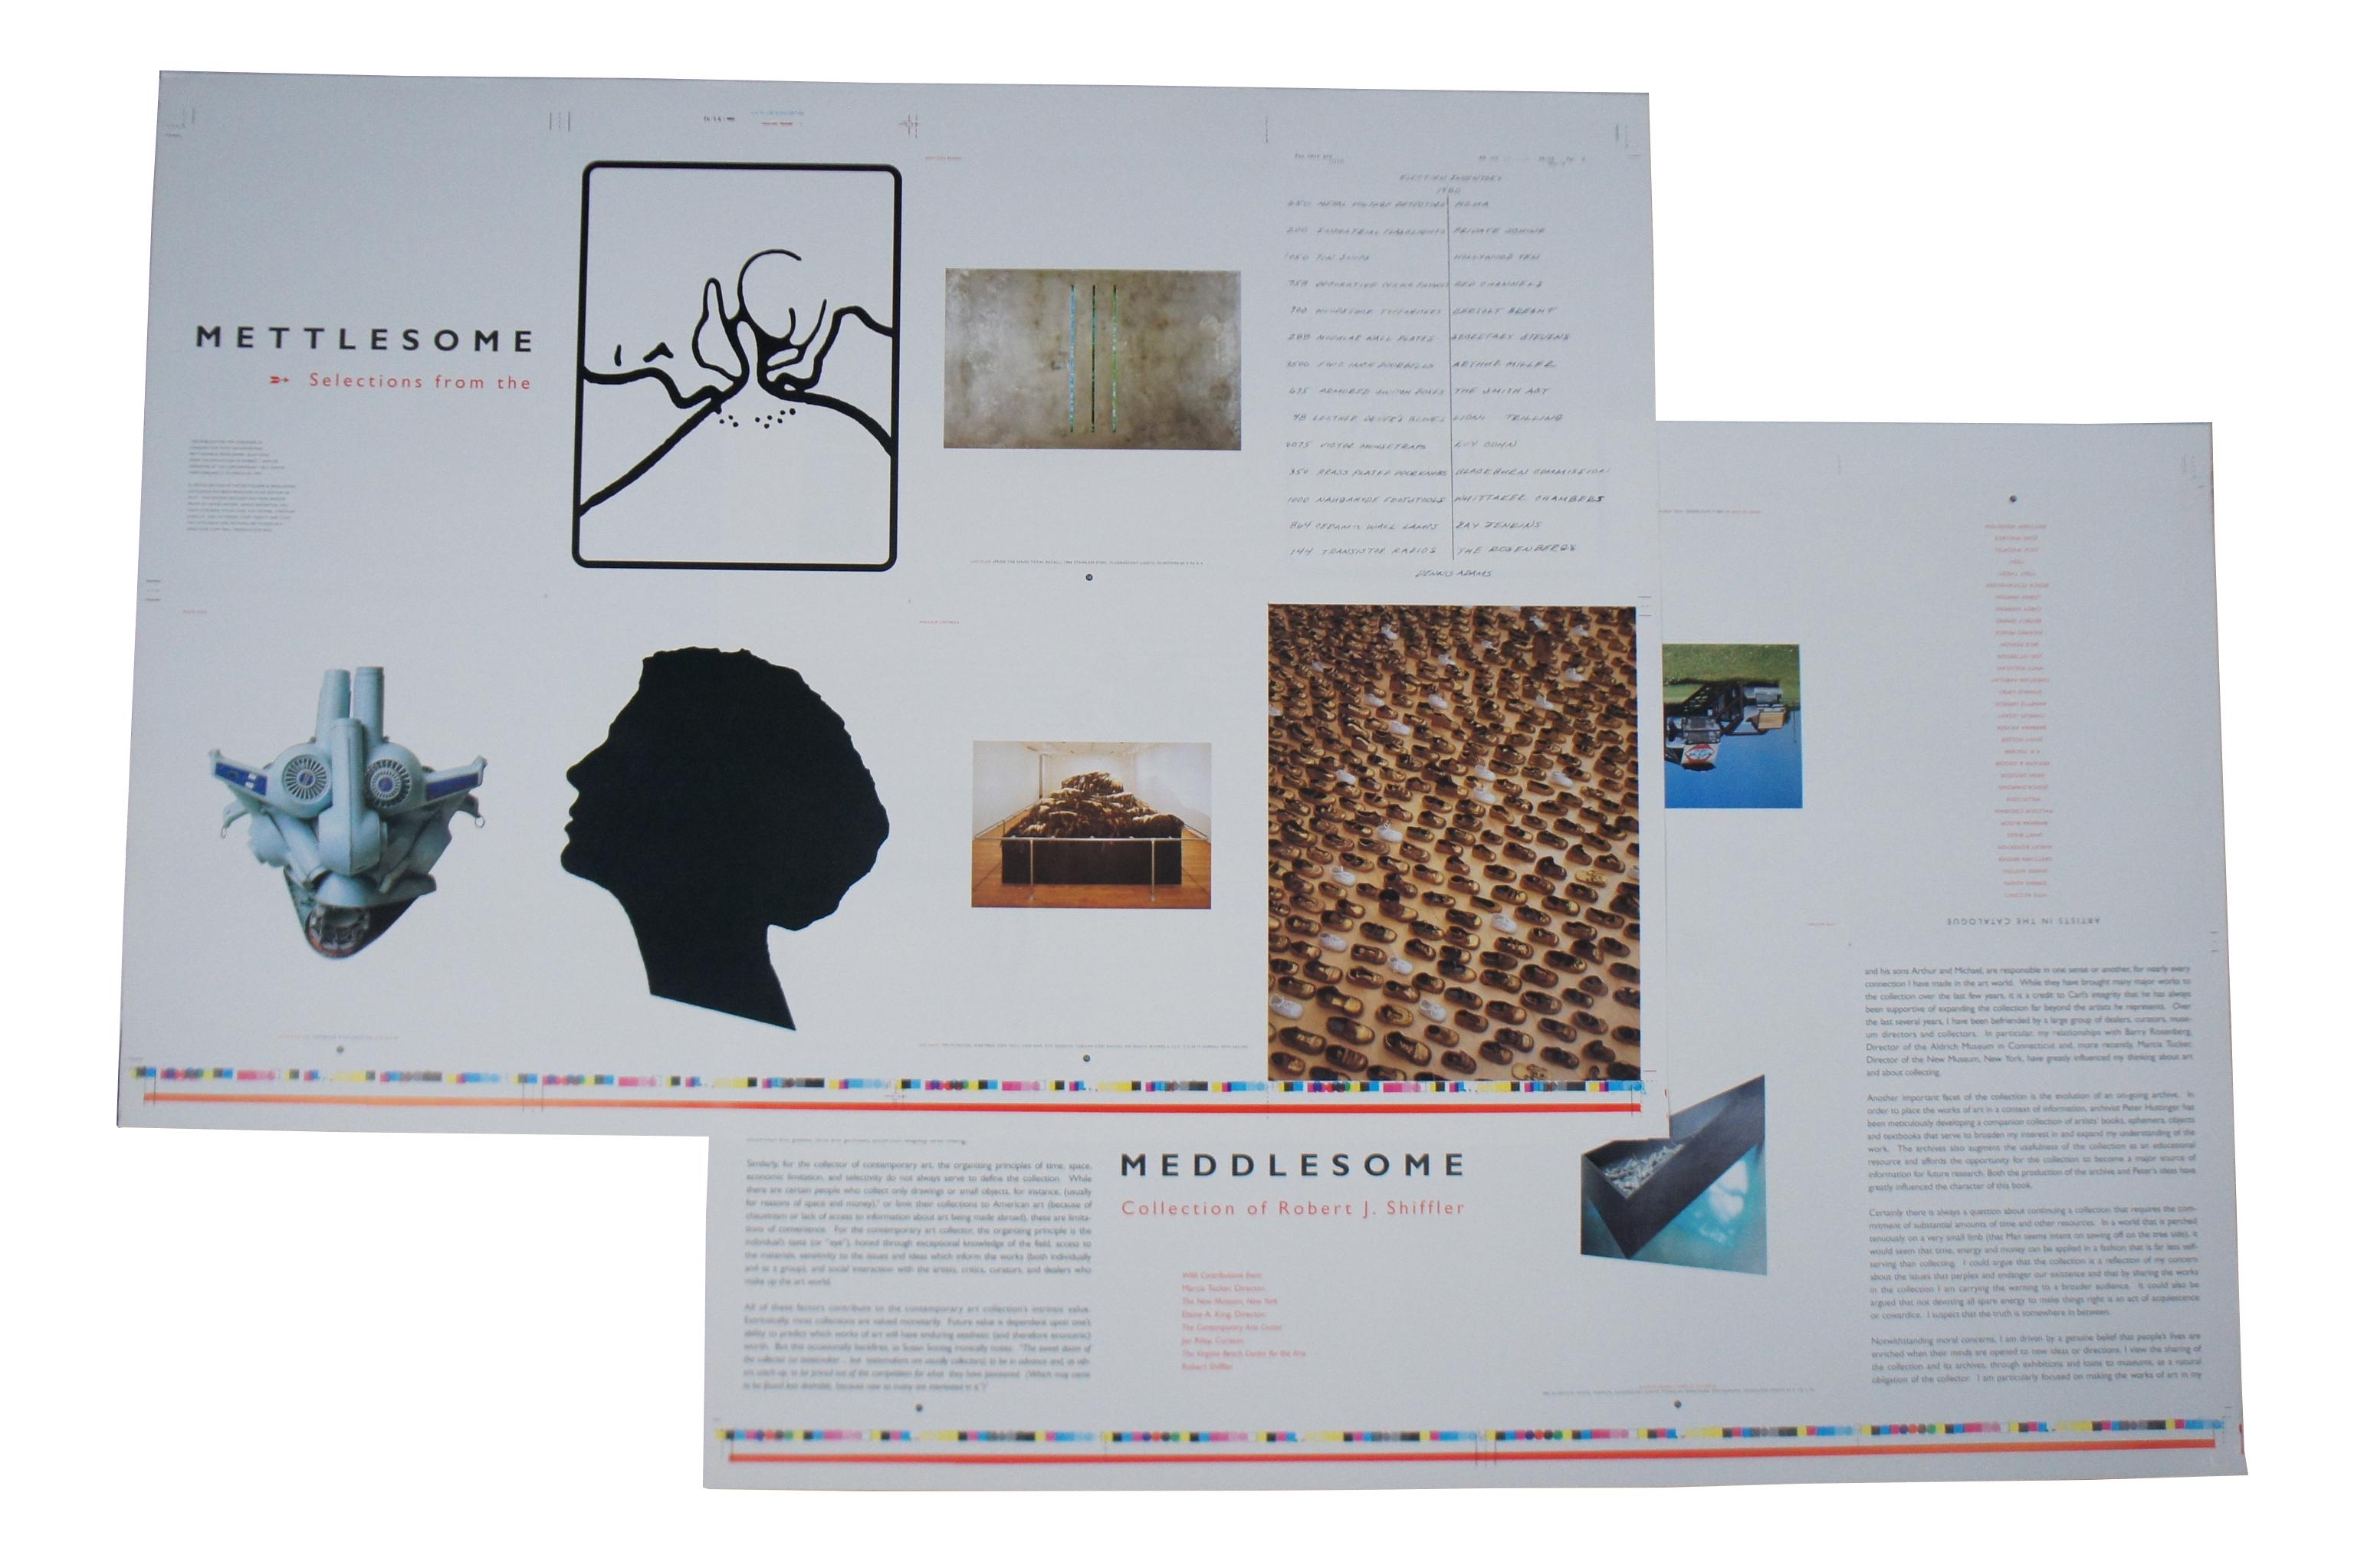 Lot of unbound press sheet pages and portfolio covers for the 1993 exhibition catalog of “Mettlesome & Meddlesome: Selections from the Collection of Robert J. Shiffler,” presented at The Contemporary Arts center in Cincinnati, Ohio from February 6